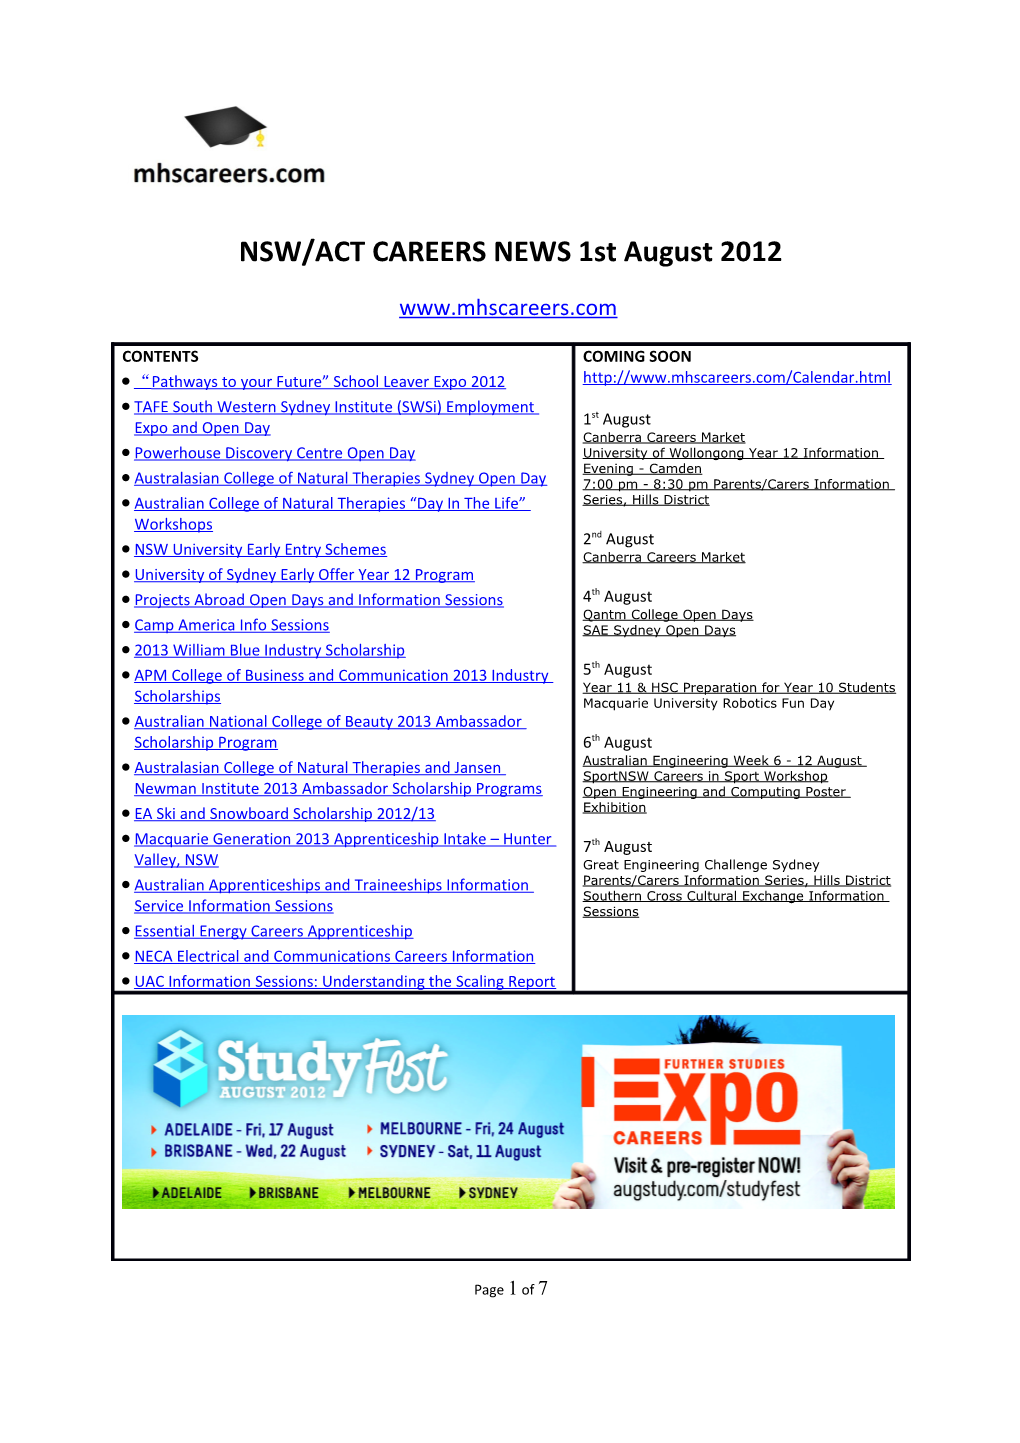 NSW/ACT CAREERS NEWS 1St August 2012